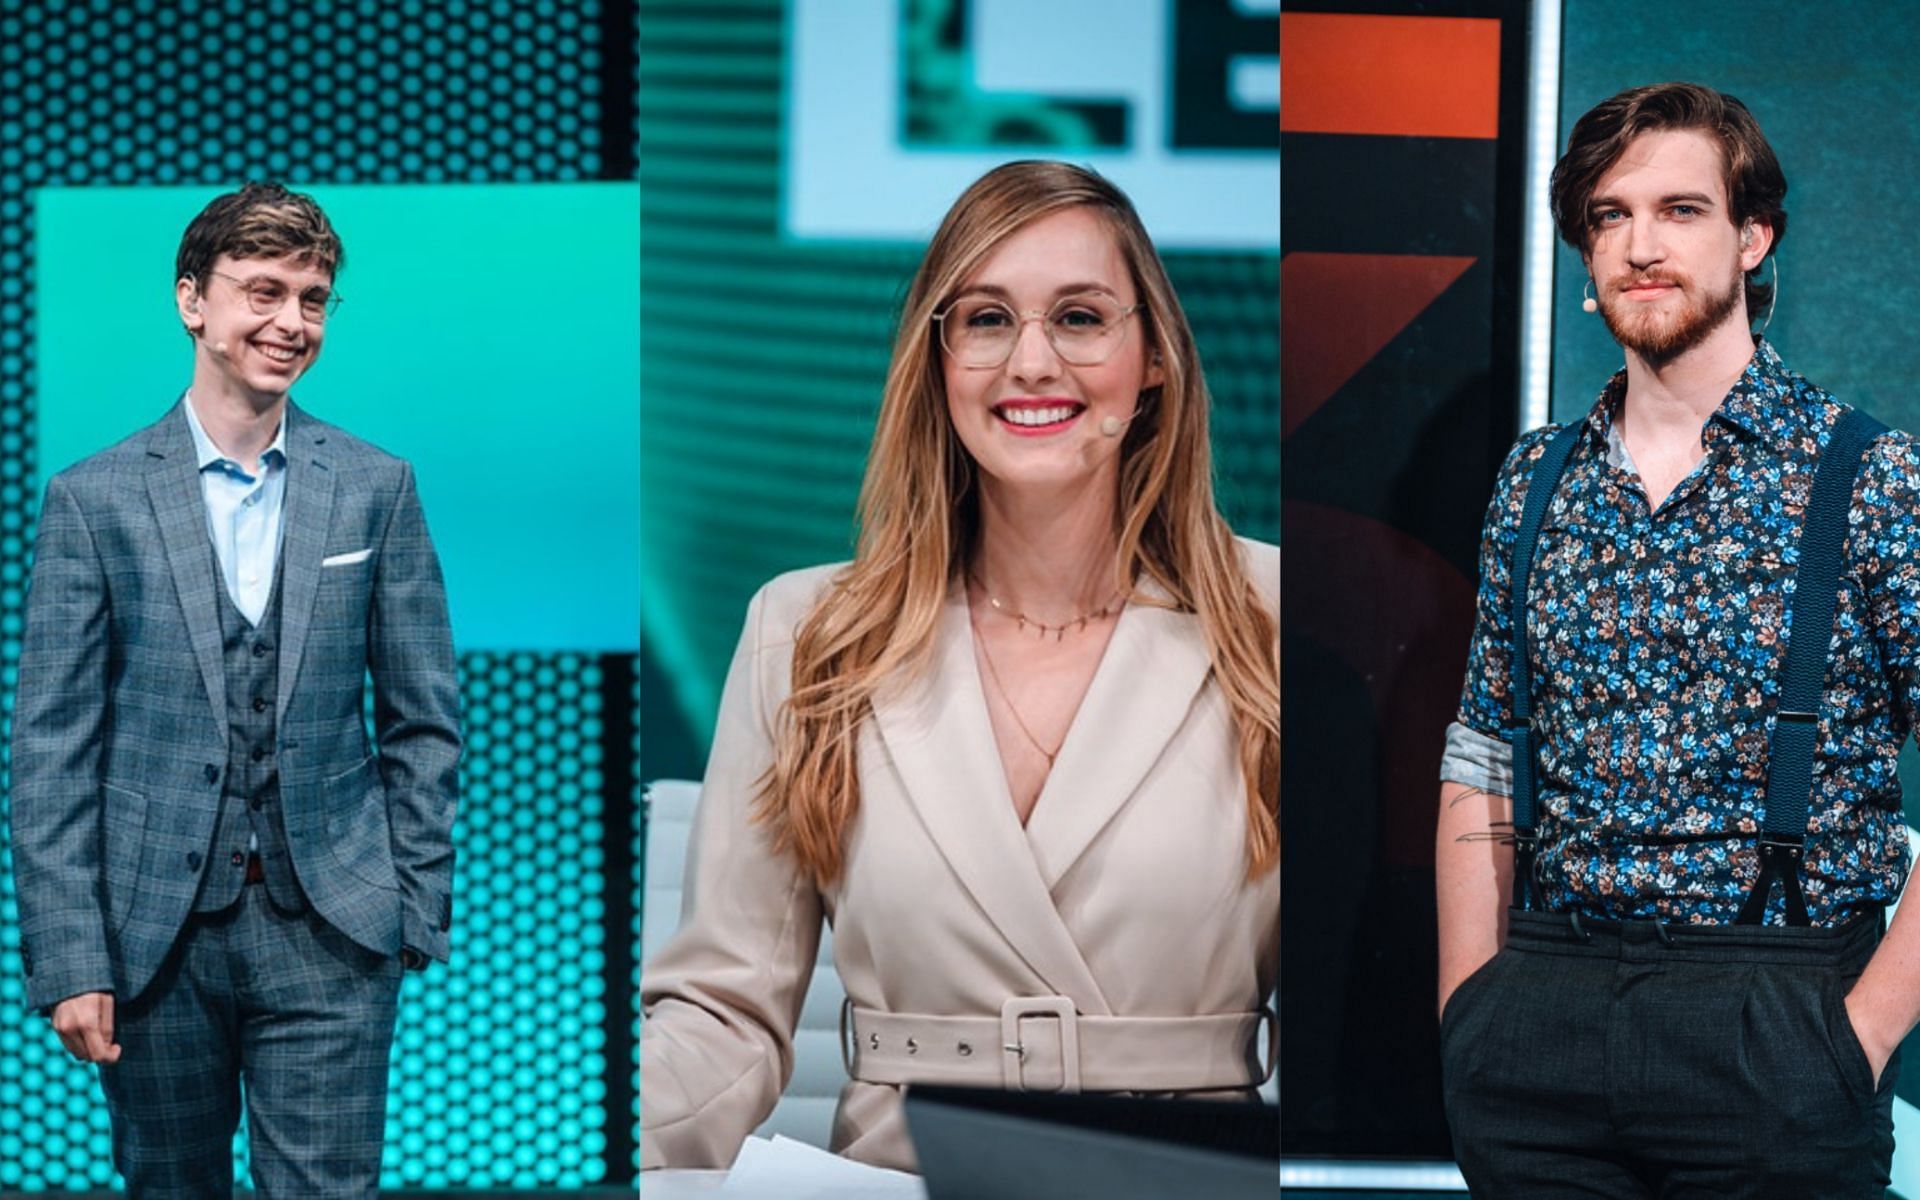 Every on-air talent set to be part of LEC 2022 Summer Split (Image via Riot Games)